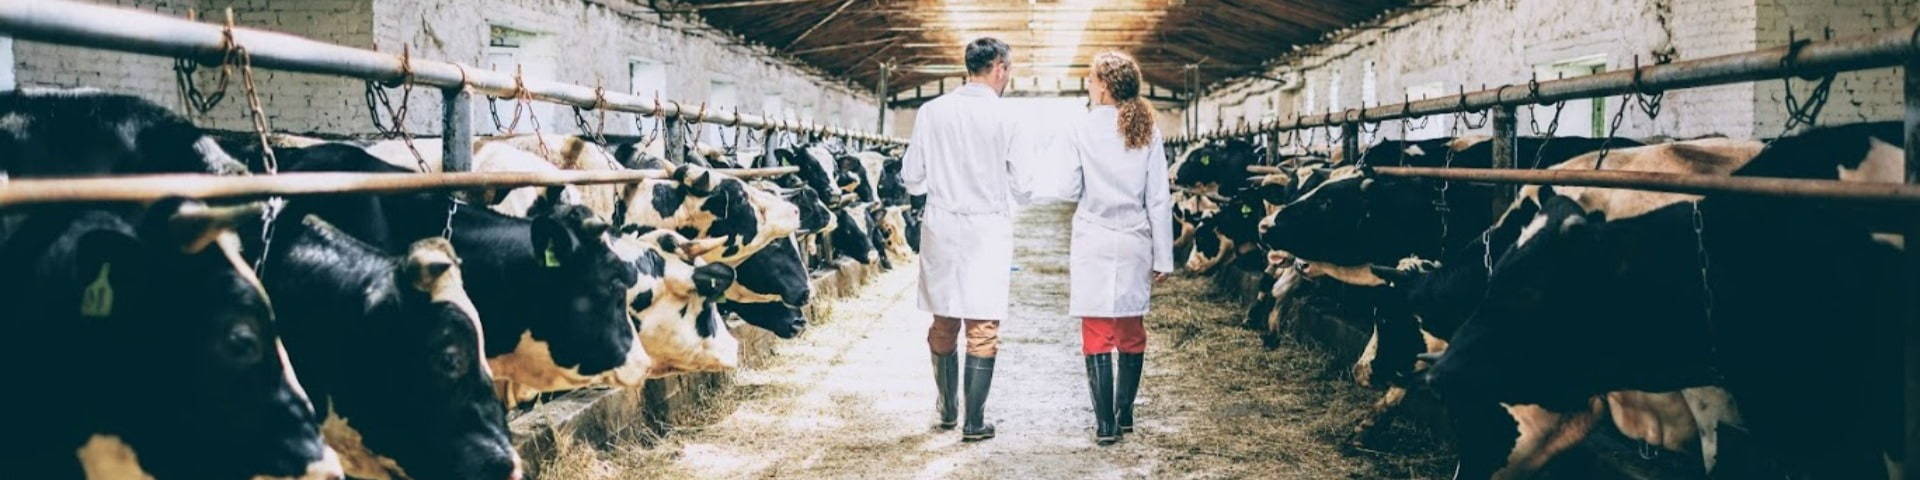 veterinarians walking through cow shed